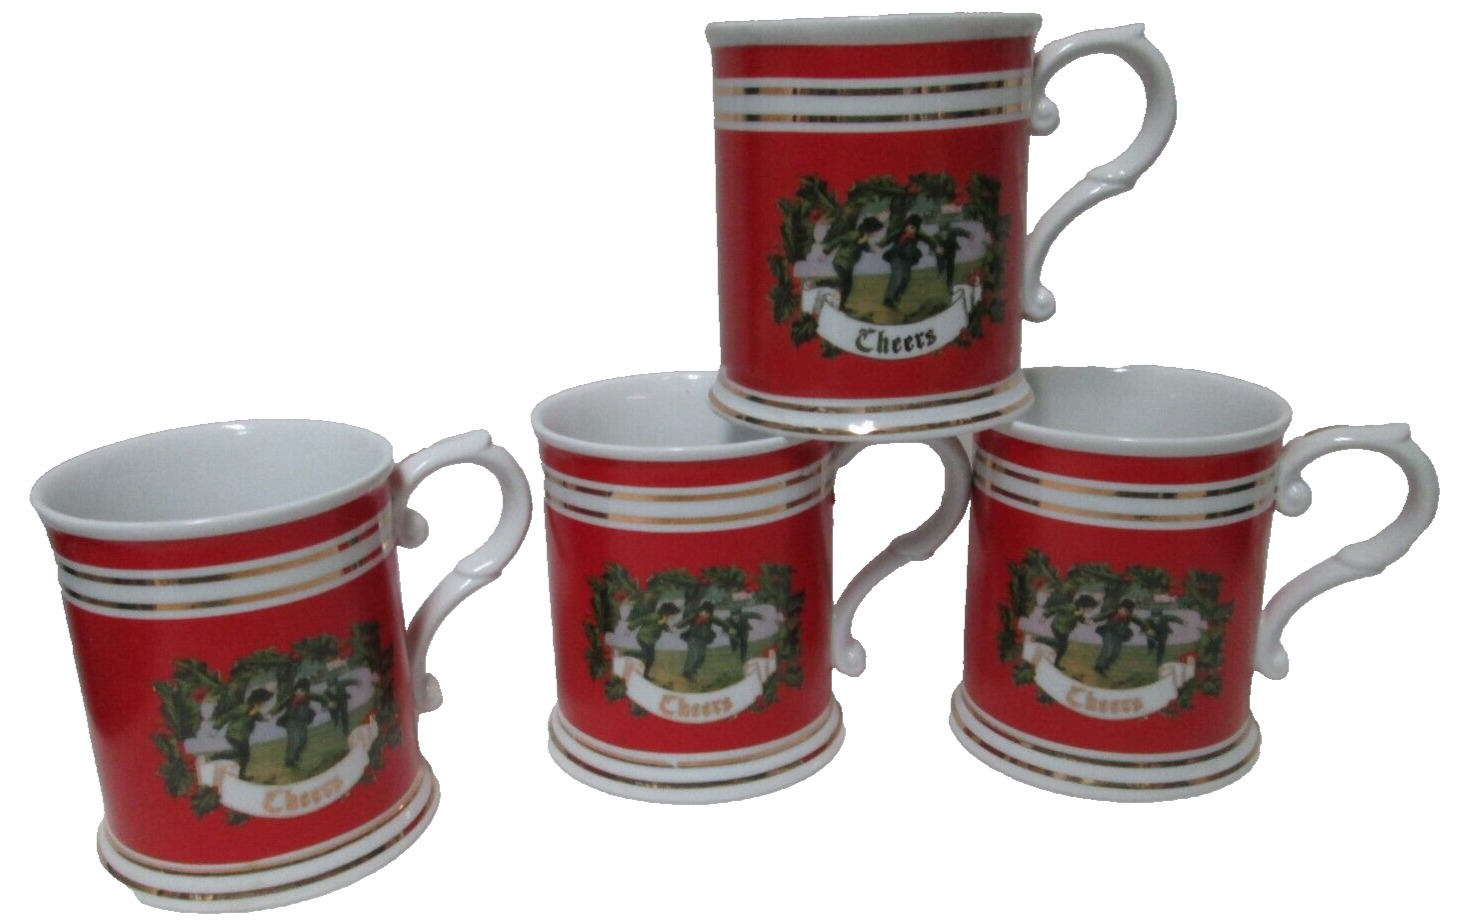 Two's Company Vintage Cheers Christmas New Year's Holiday mug cup set 4 red gold